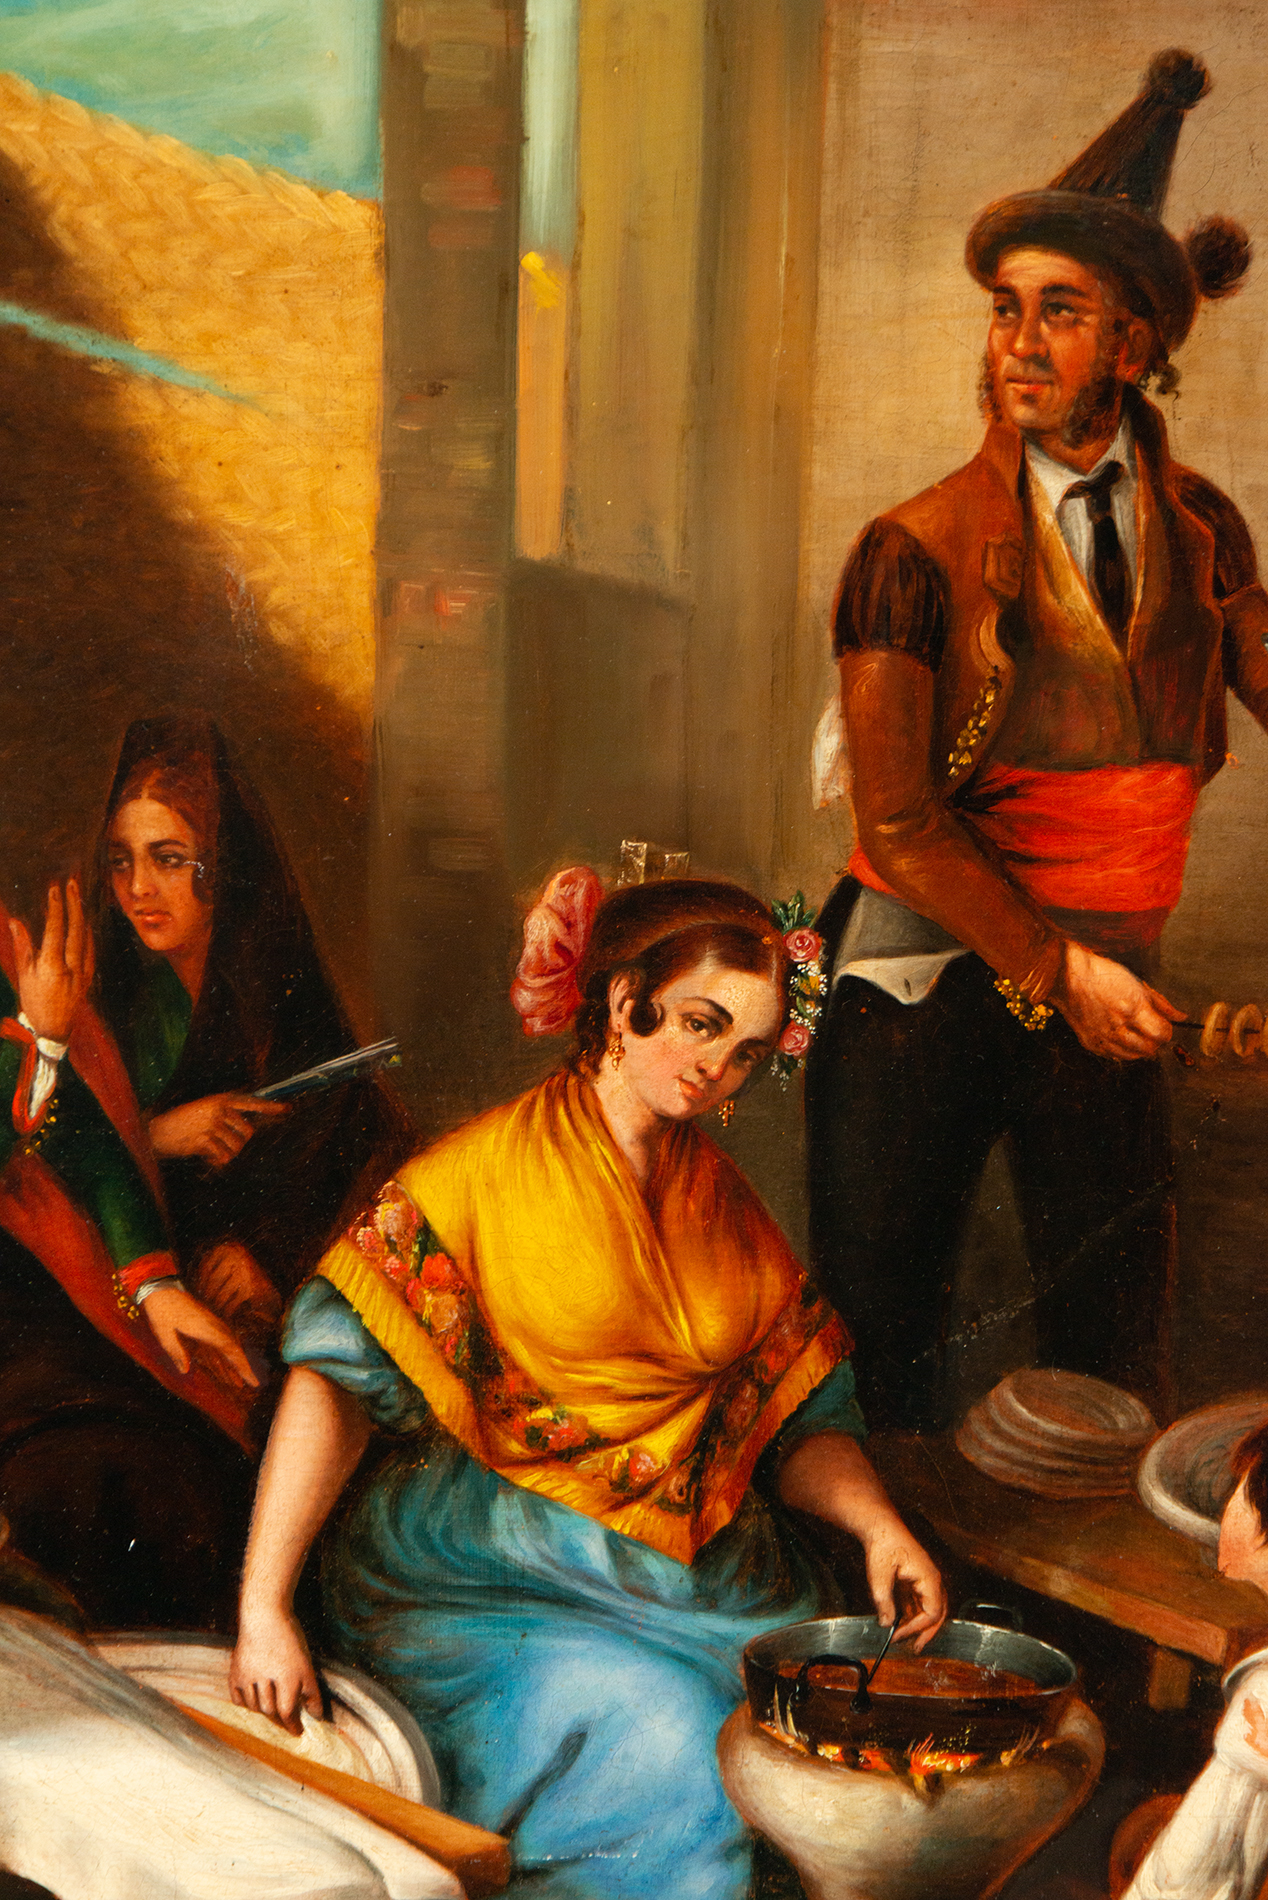 Andalusian family cooking dinner, 19th century Andalusian school, signed Rodríguez Becquer - Image 4 of 6